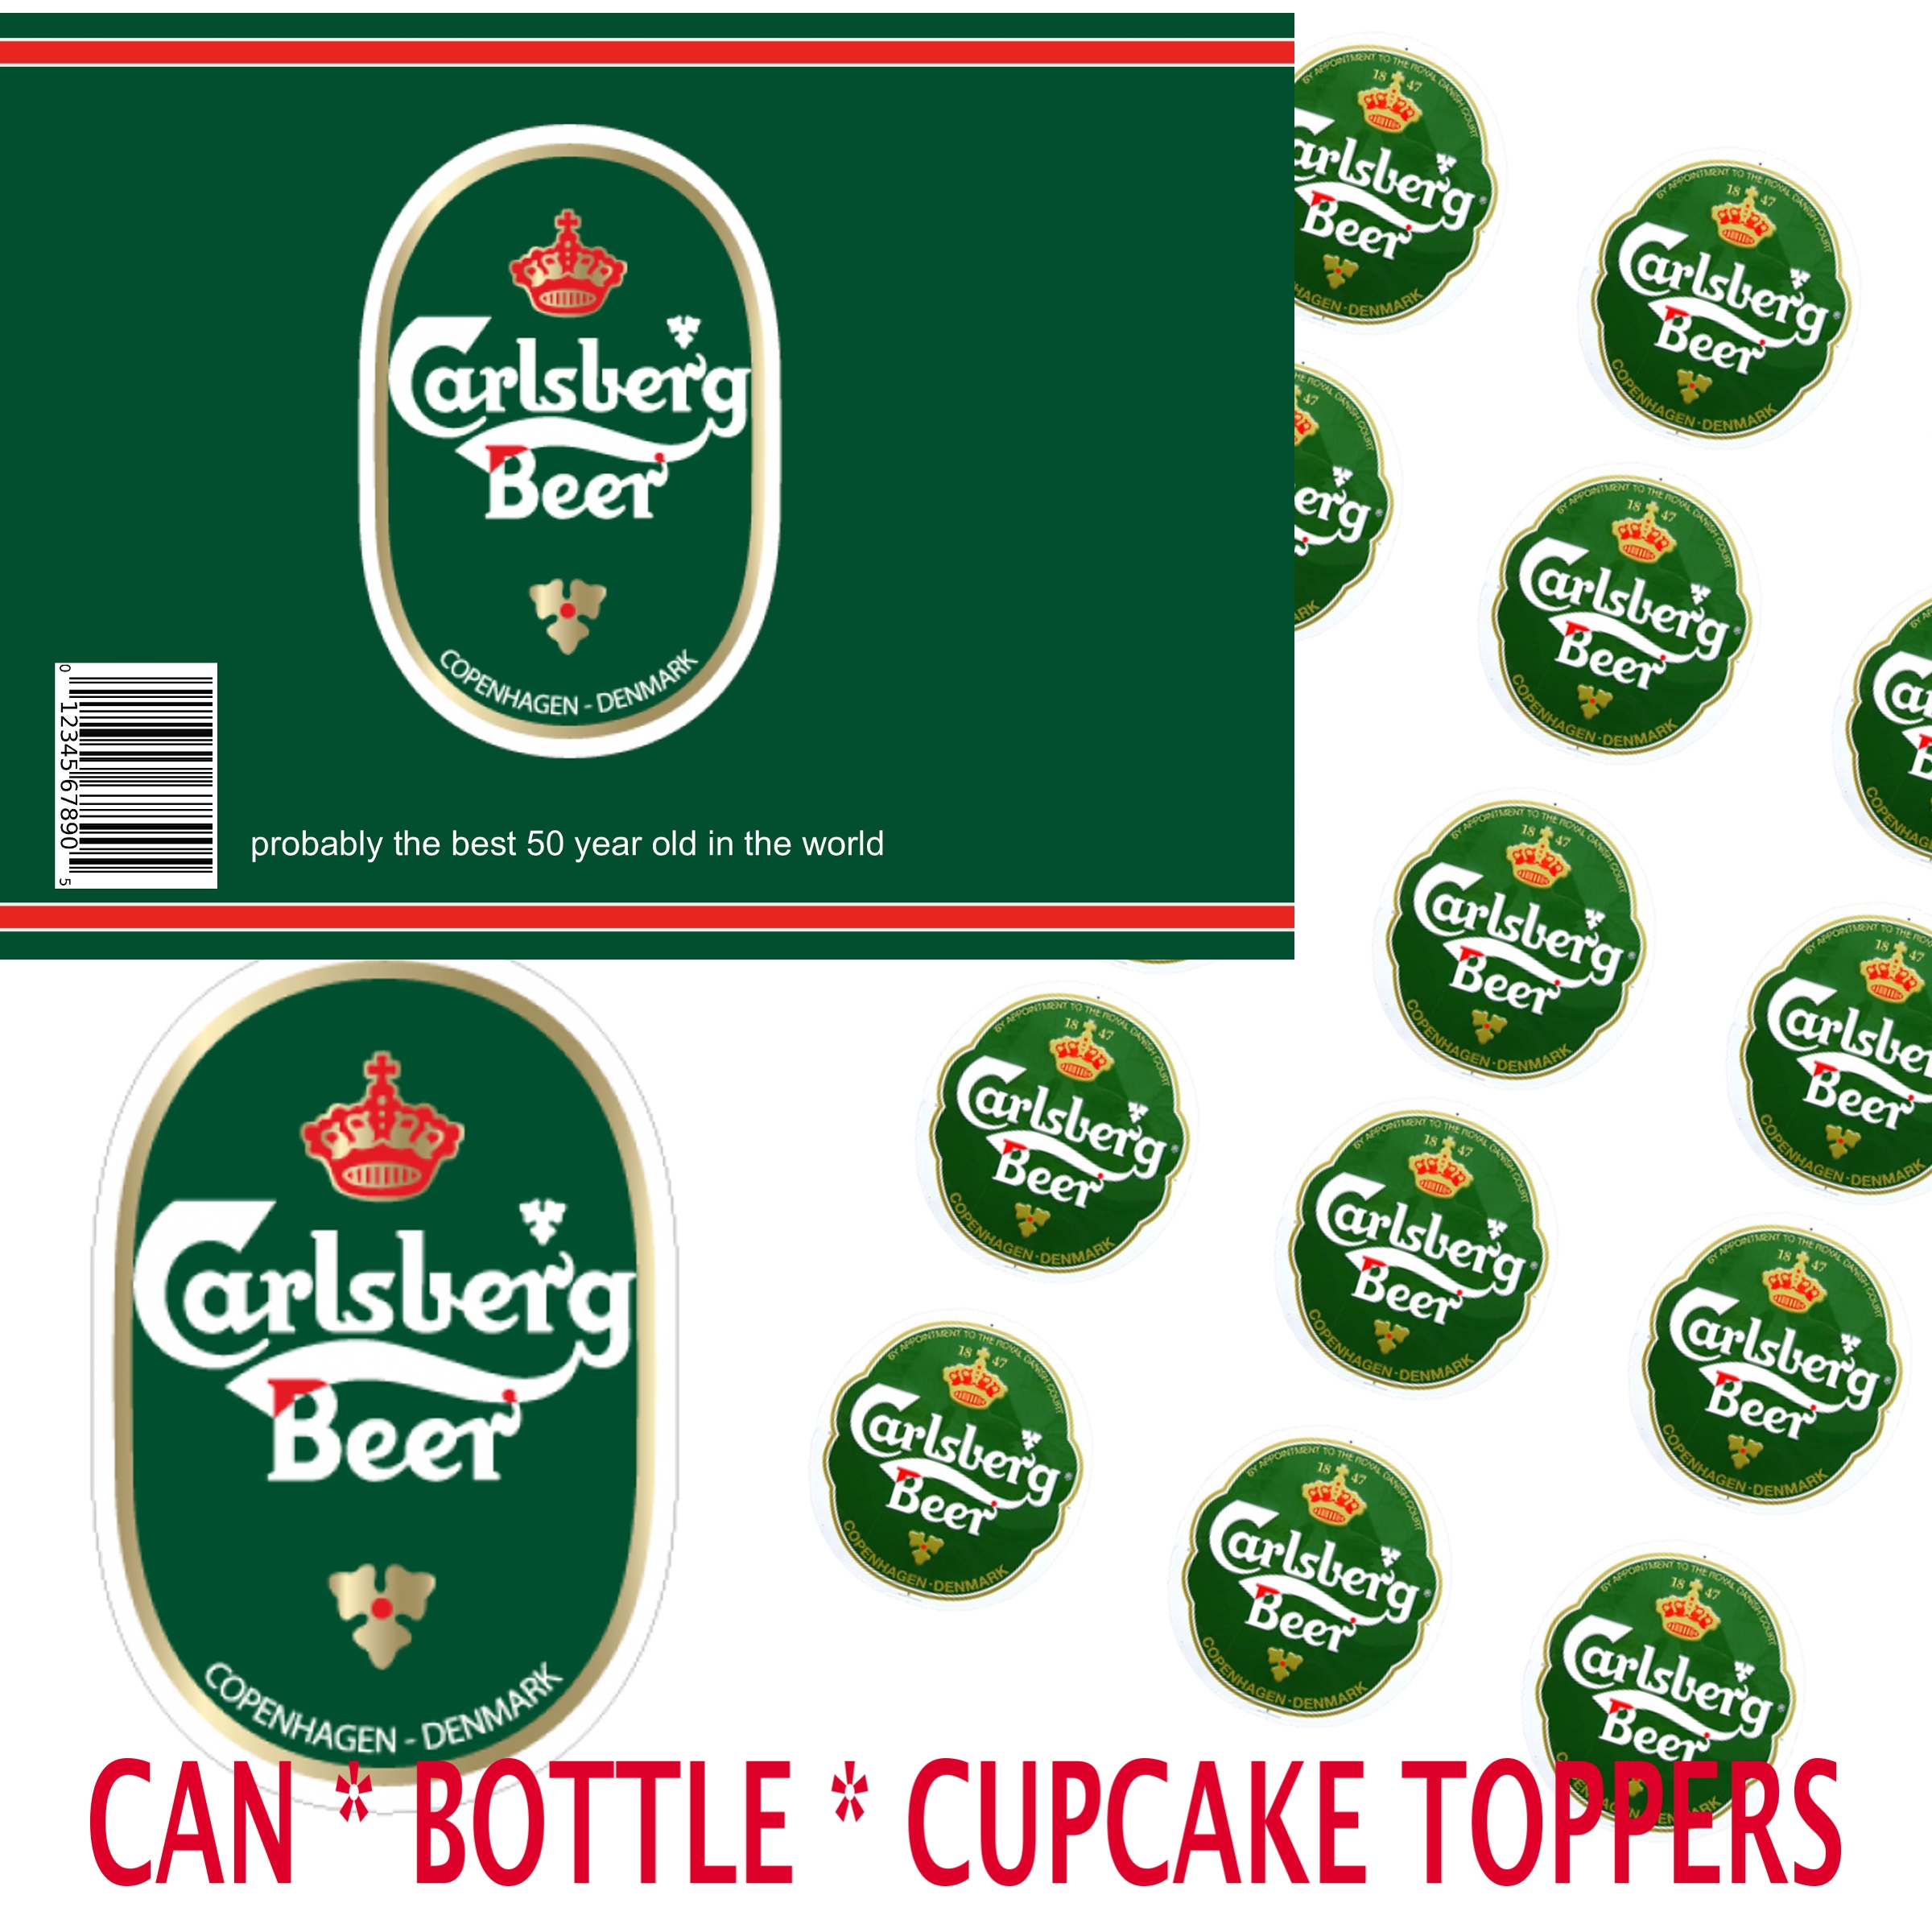 Carlsberg beer can & bottle labels edible icing cake & cupcake toppers 